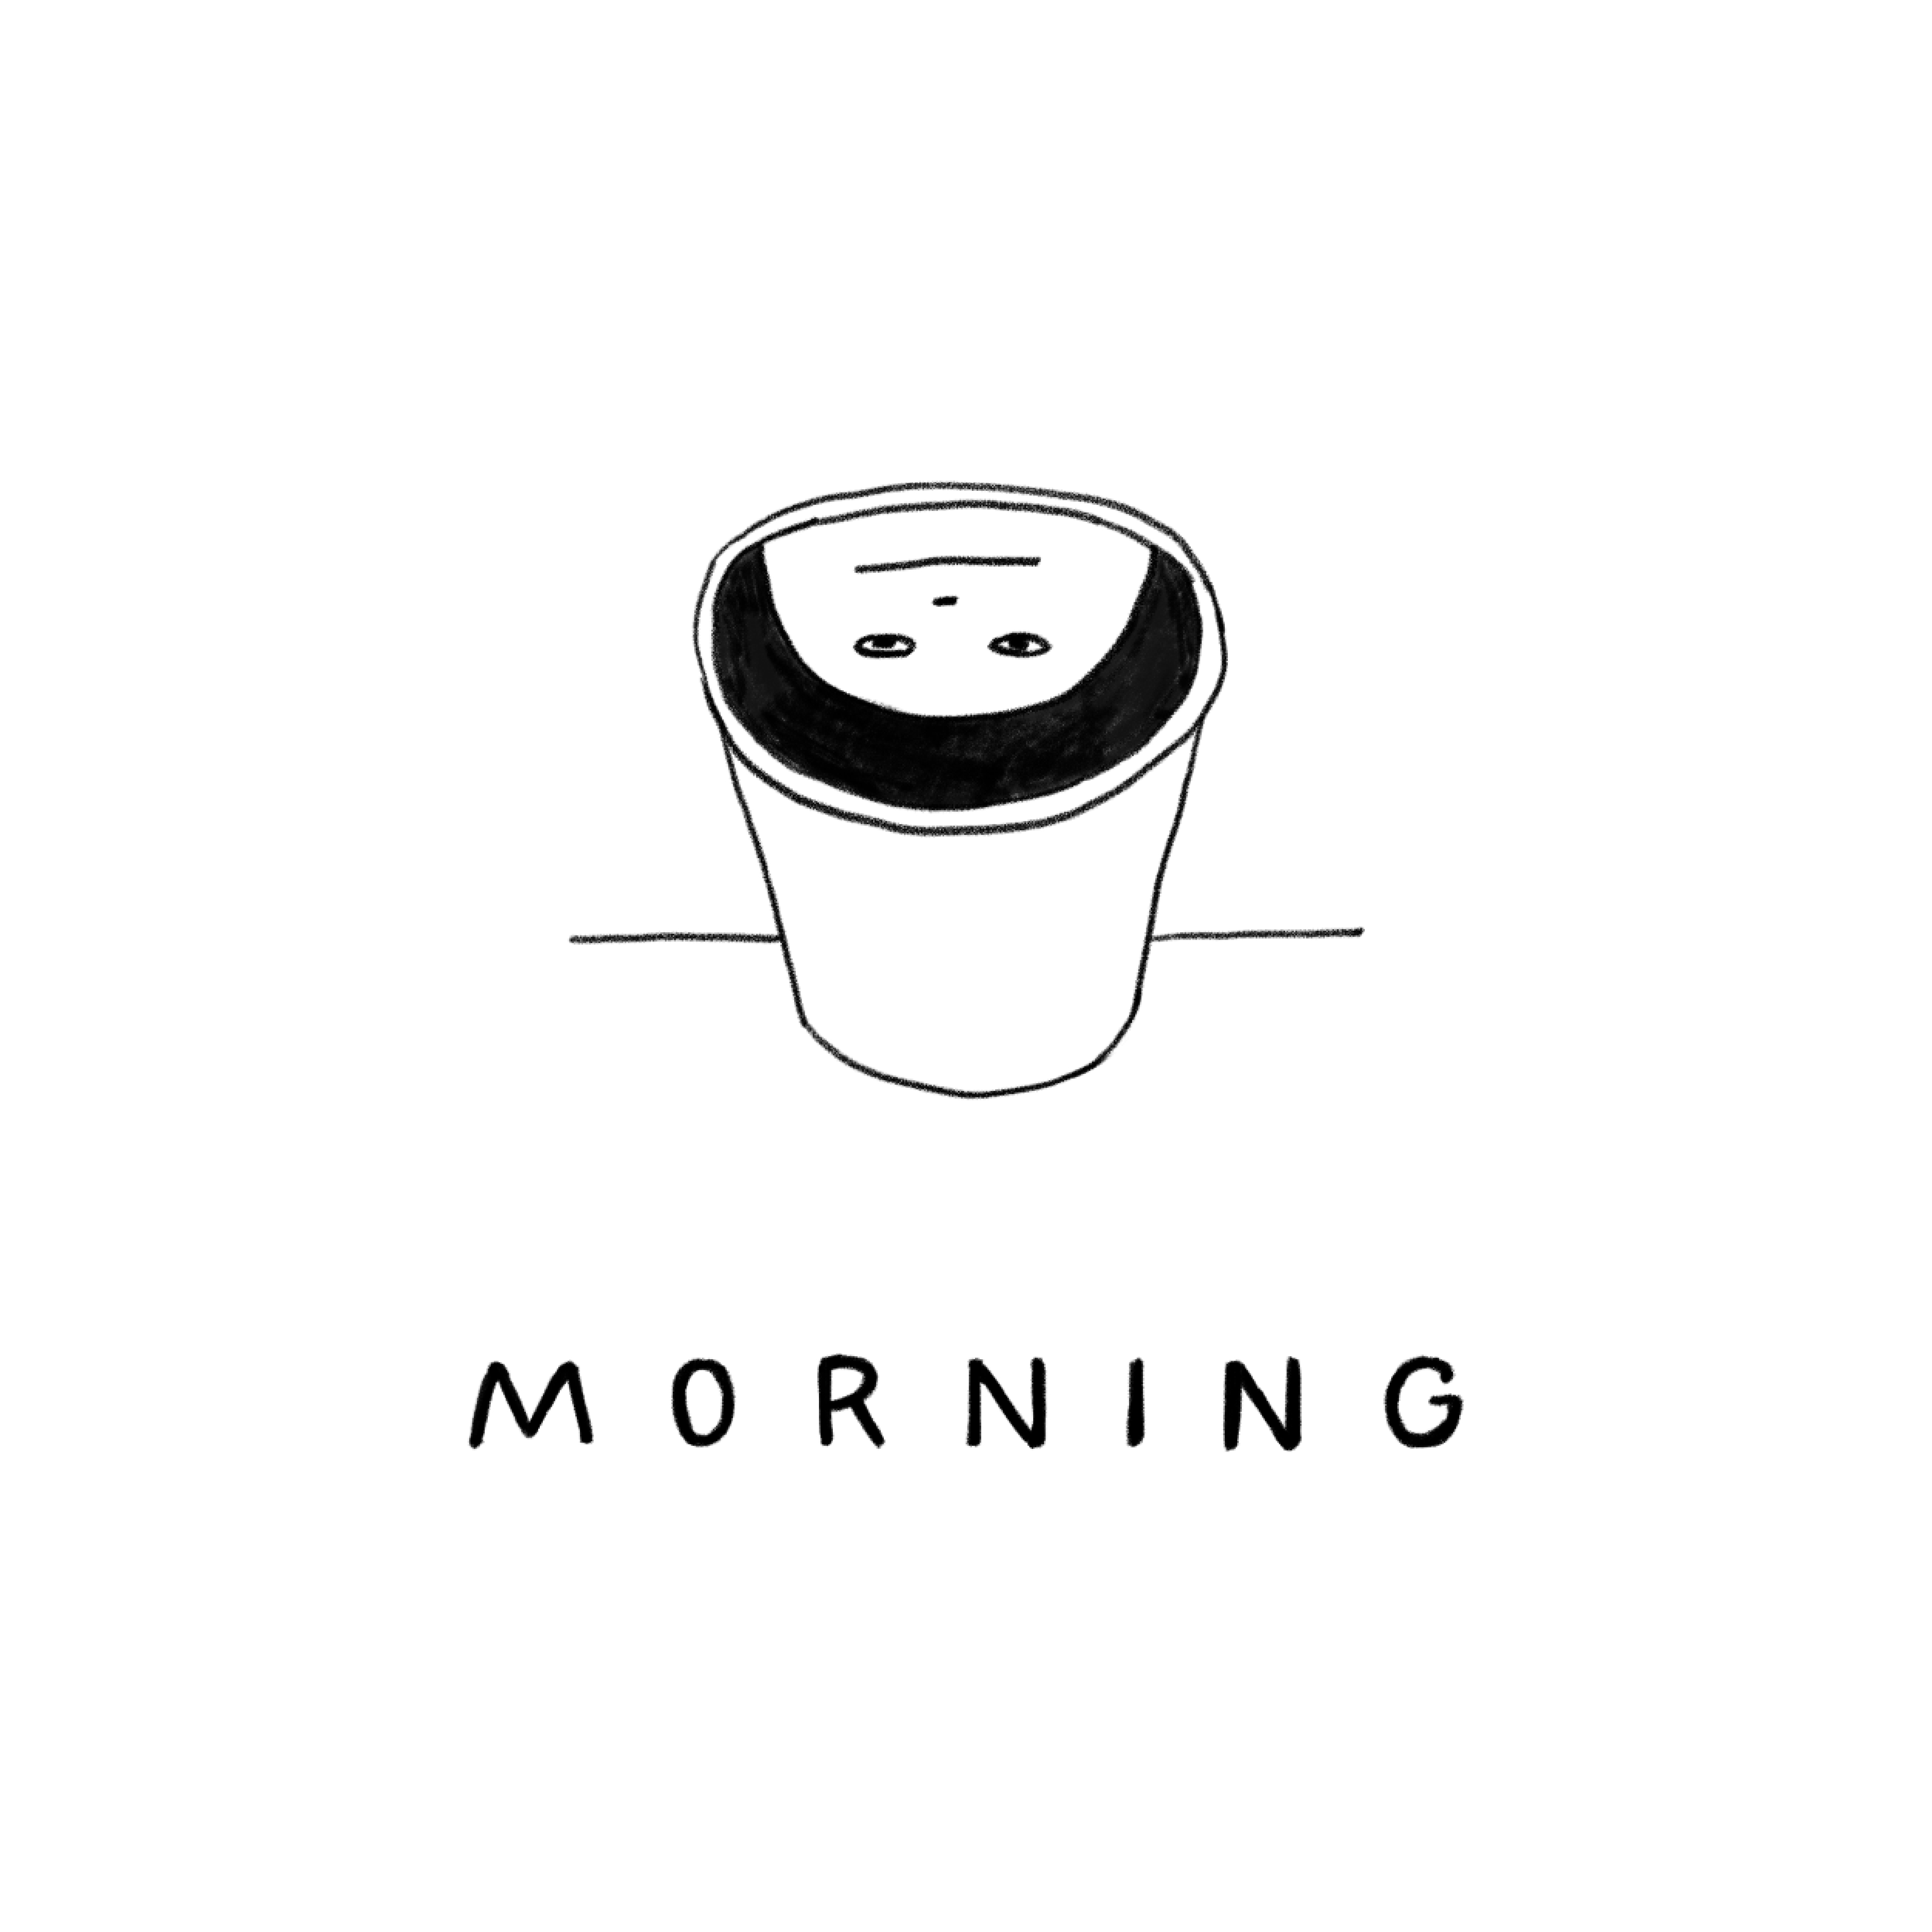 Morning logo design by logo designer miranchukova for your inspiration and for the worlds largest logo competition